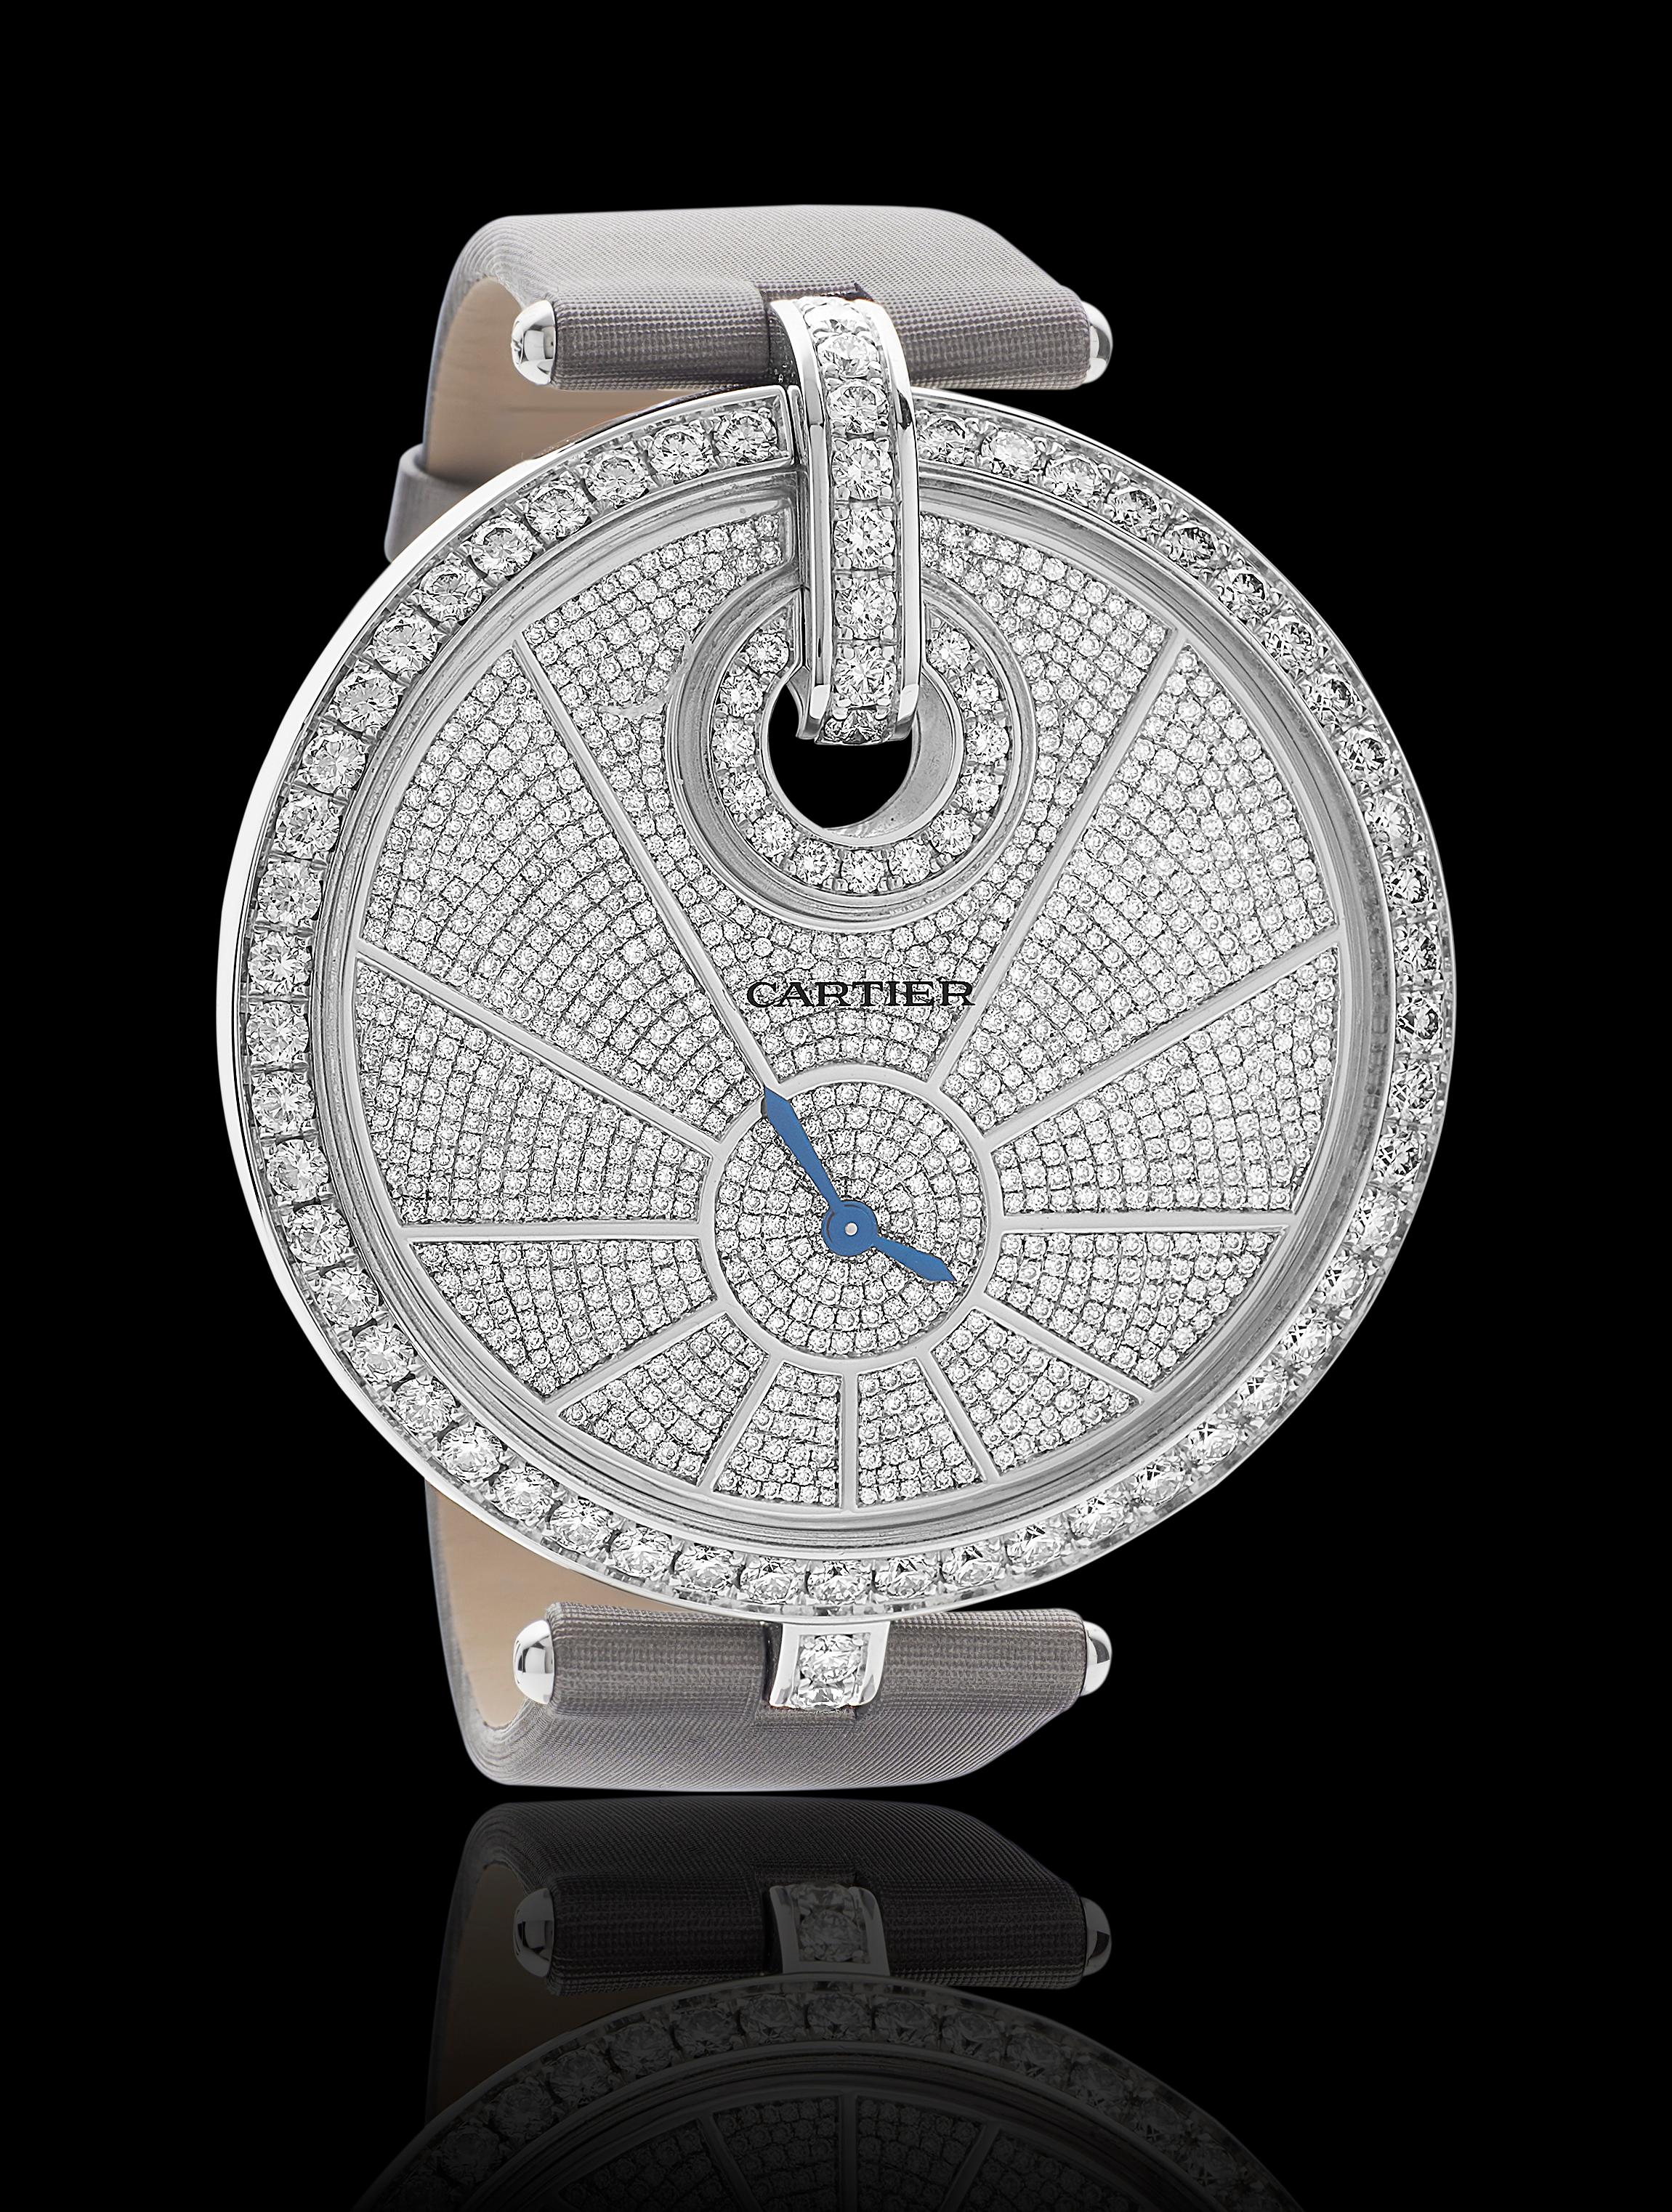 The refined and sensual Captive de Cartier watch cultivates the mystery surrounding its enigmatic form. The radiant roundness of the dial is enhanced by an alluring jewelled clasp. A watch hemmed with diamonds to charm the passage of time and its